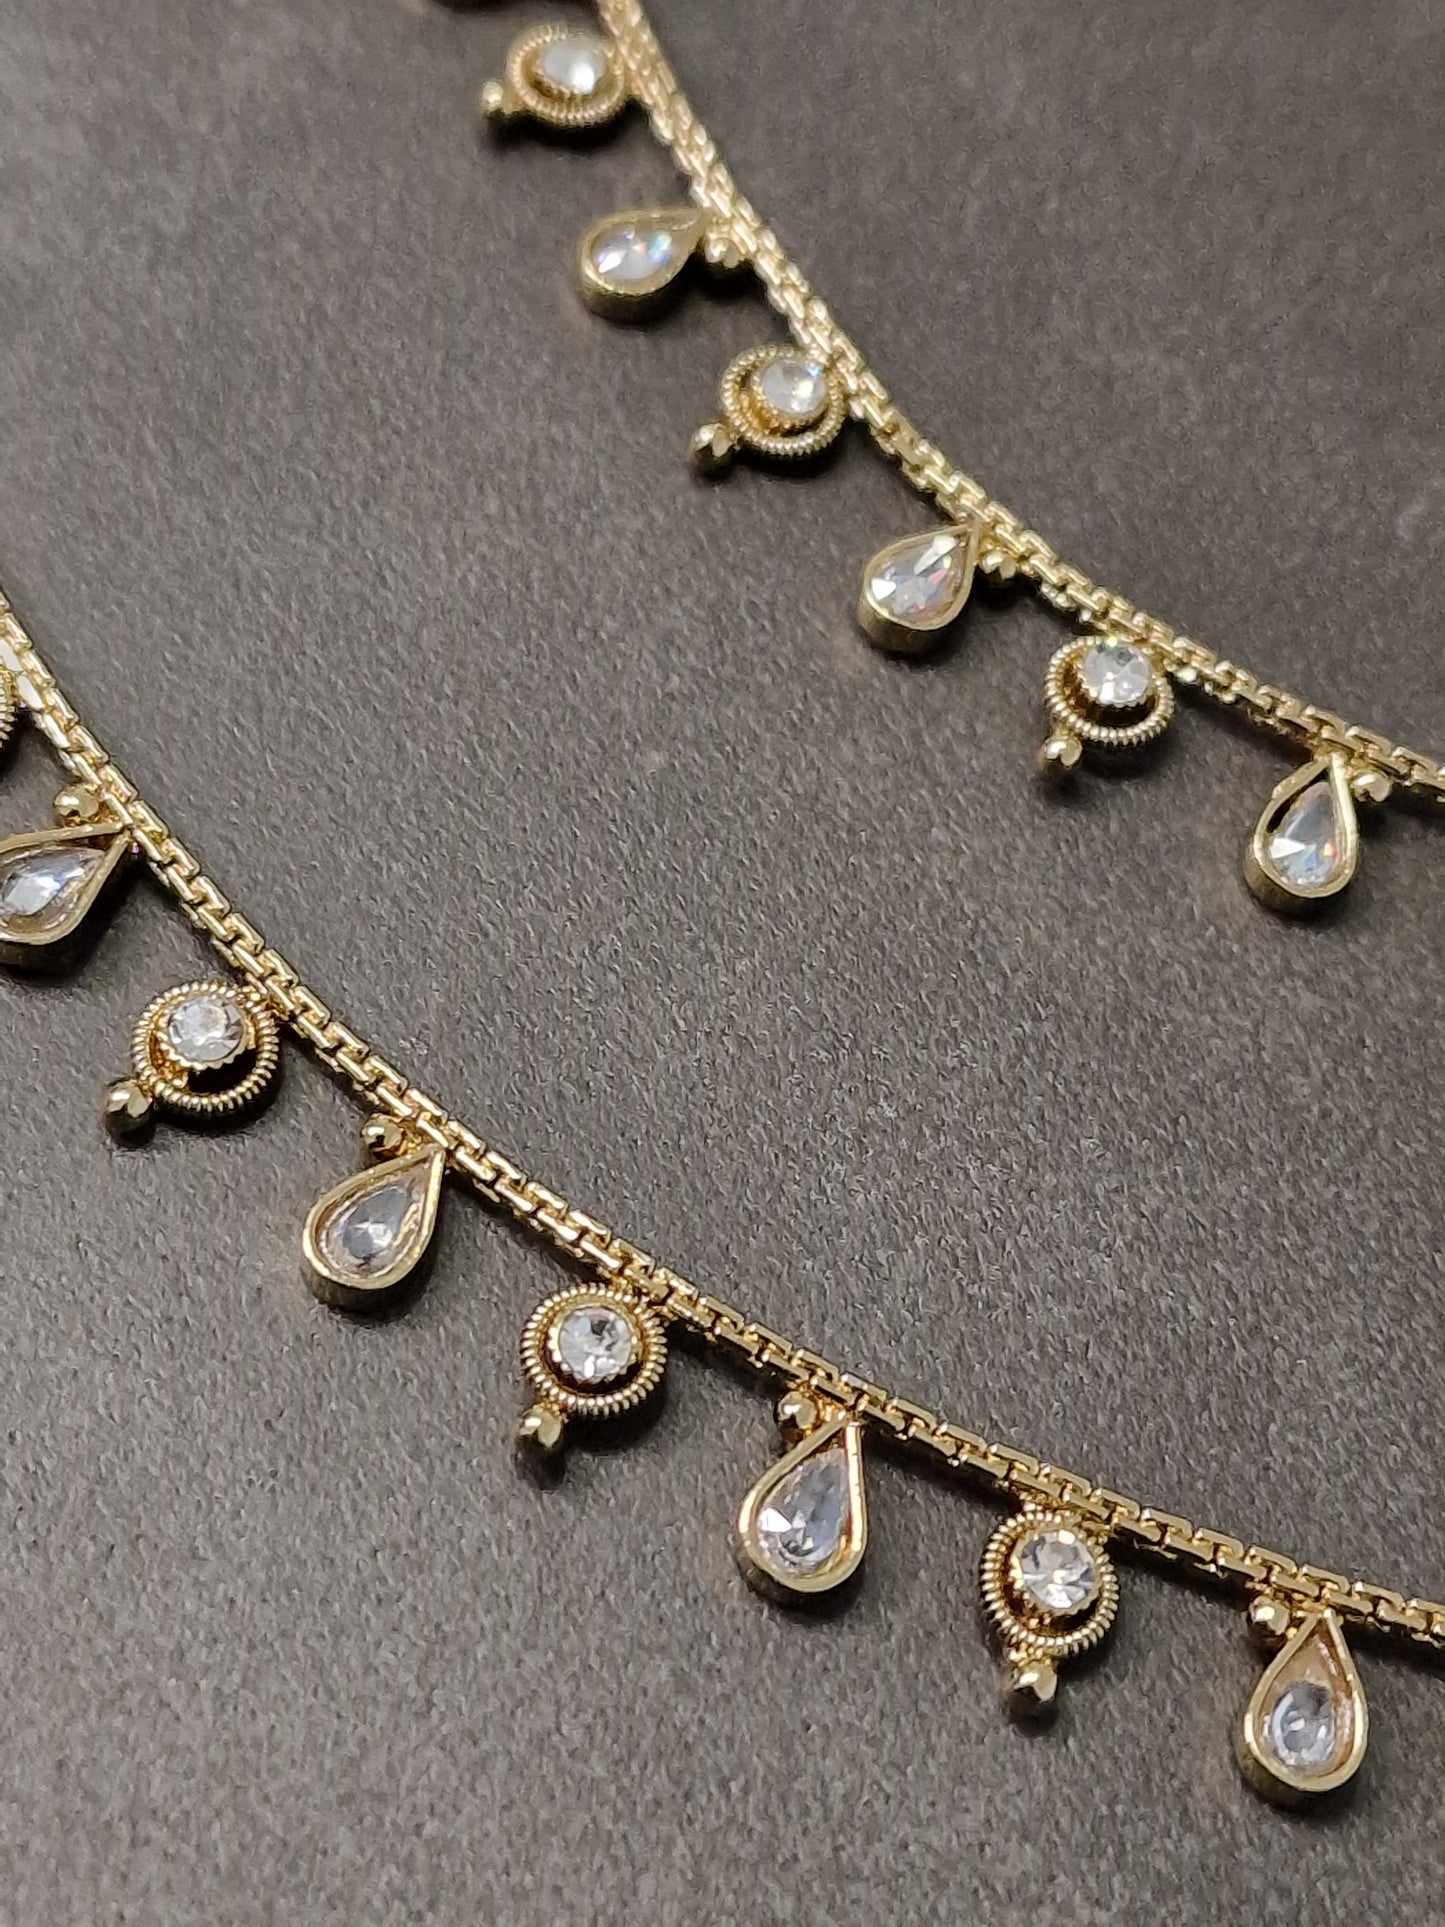 Teardrop Anklets - Neutral or white stones.